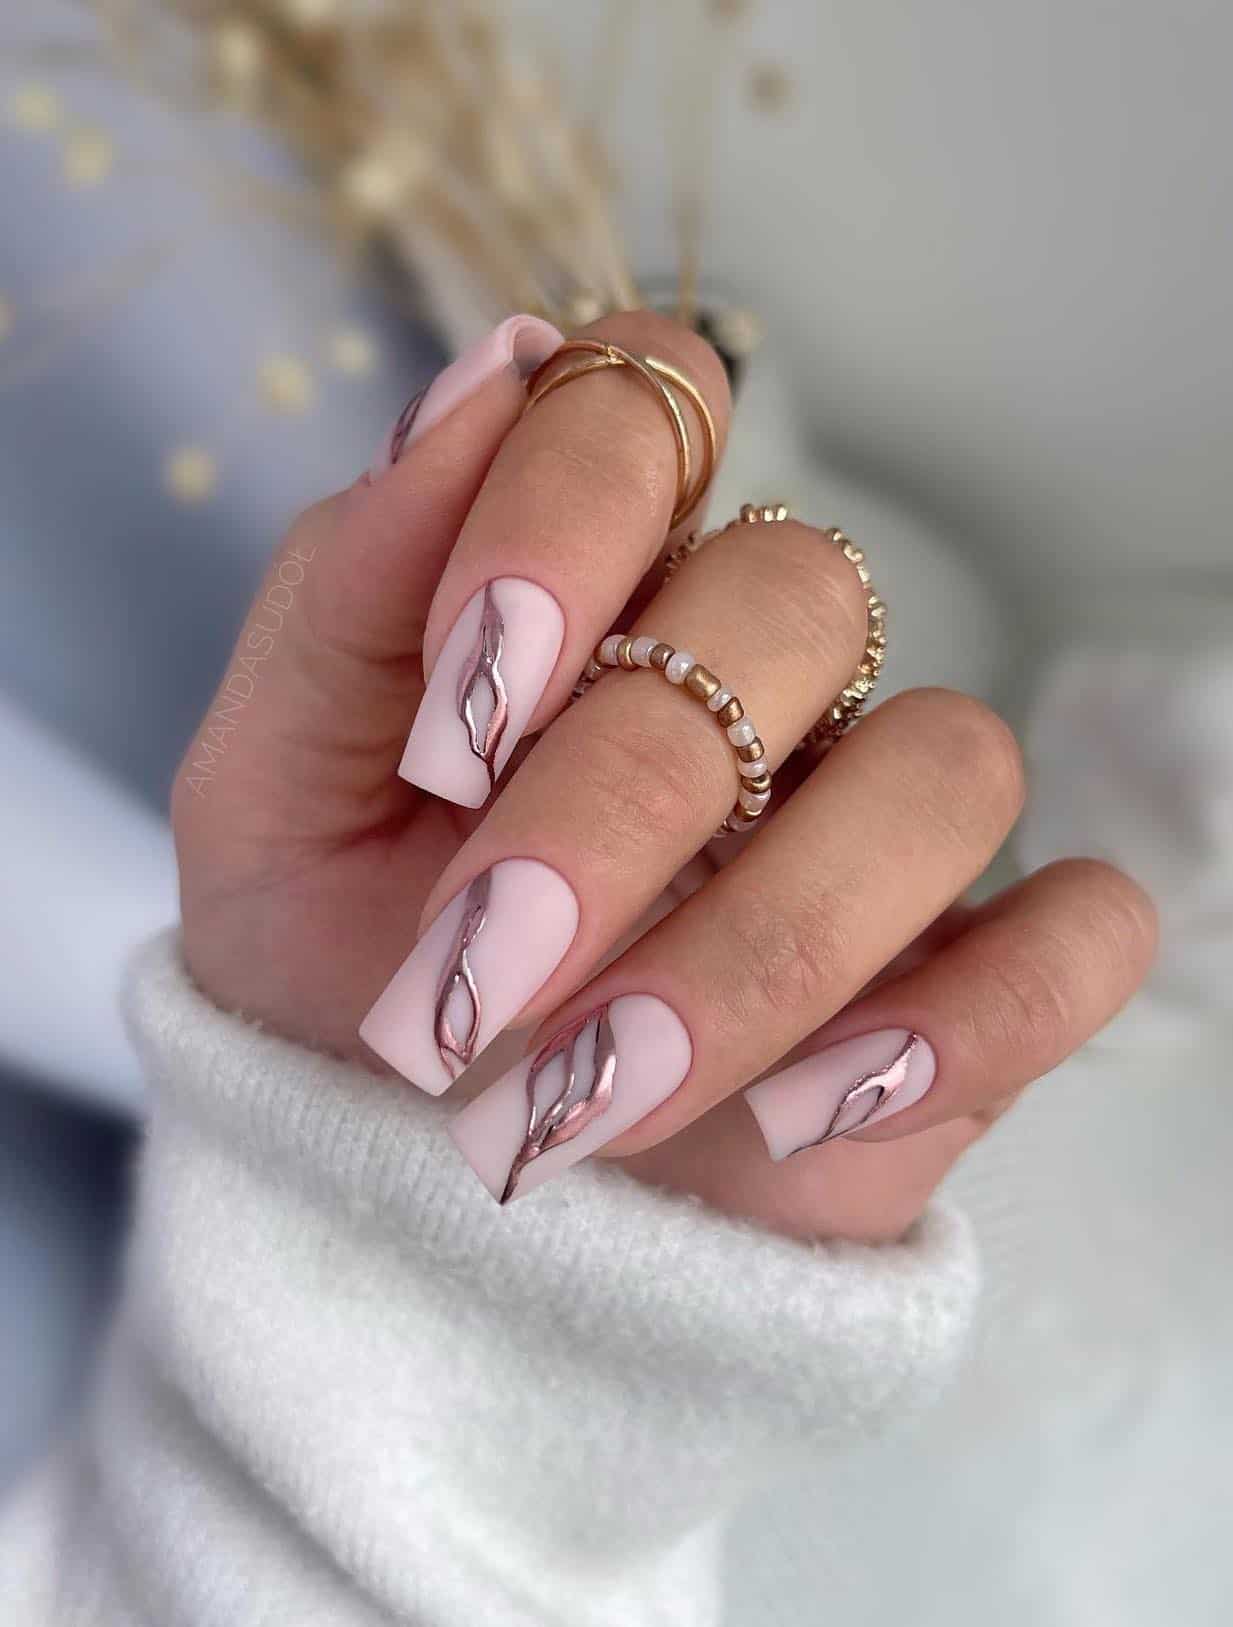 A hand with long square nails painted a matte pastel pink with metallic rose gold accents